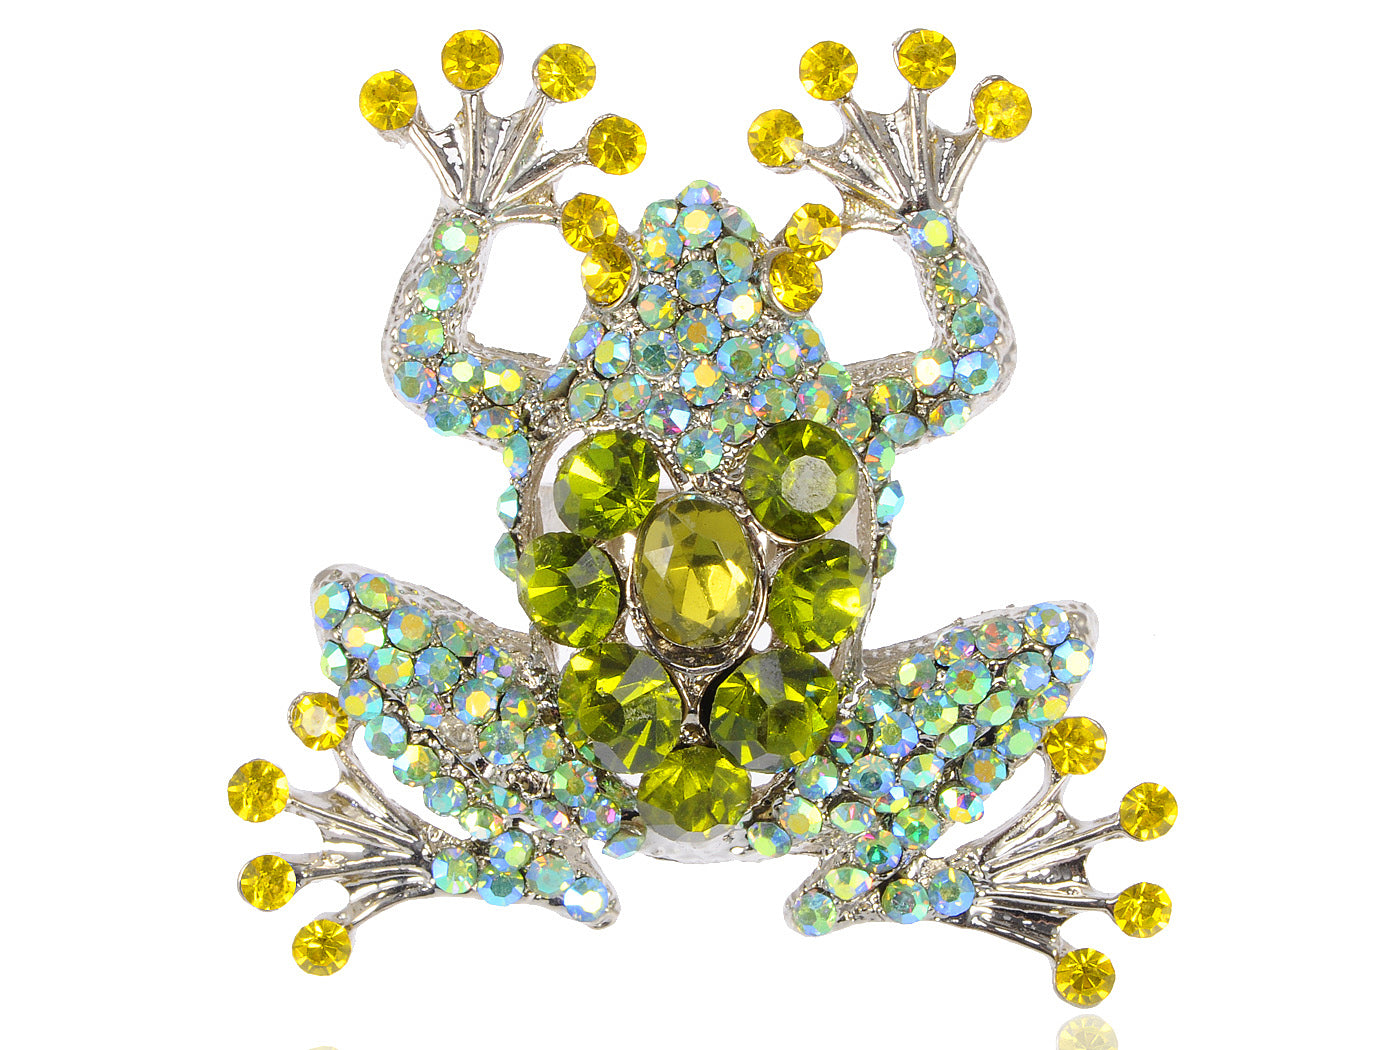 Periodot Green Leaping Frog Prince Amphibian Ring